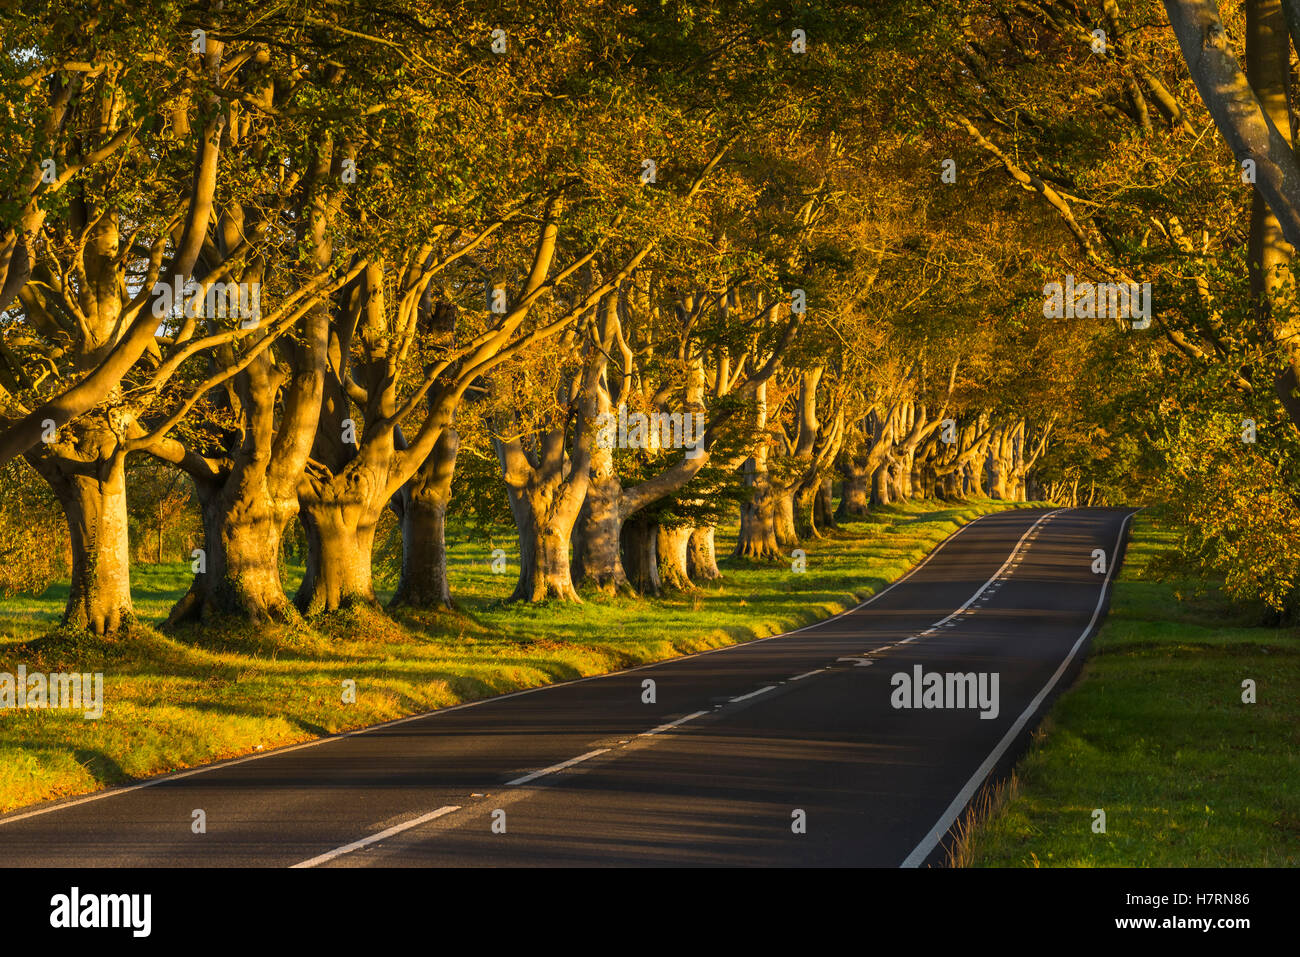 Wimborne, Dorset, UK. 7th Nov, 2016. UK Weather. Late afternoon golden autumn sunshine illuminates the iconic beech tree venue along the B3082 Blandford Road at Badbury Rings near Kingston Lacy at Wimborne in Dorset. The avenue of trees is maintained by the National Trust but is gradually being replaced by a new avenue of trees further away from the edge of the road due the age of the trees making them brittle and dangerous. The image was taken from a public right of way.  Credit:  Graham Hunt/Alamy Live News Stock Photo